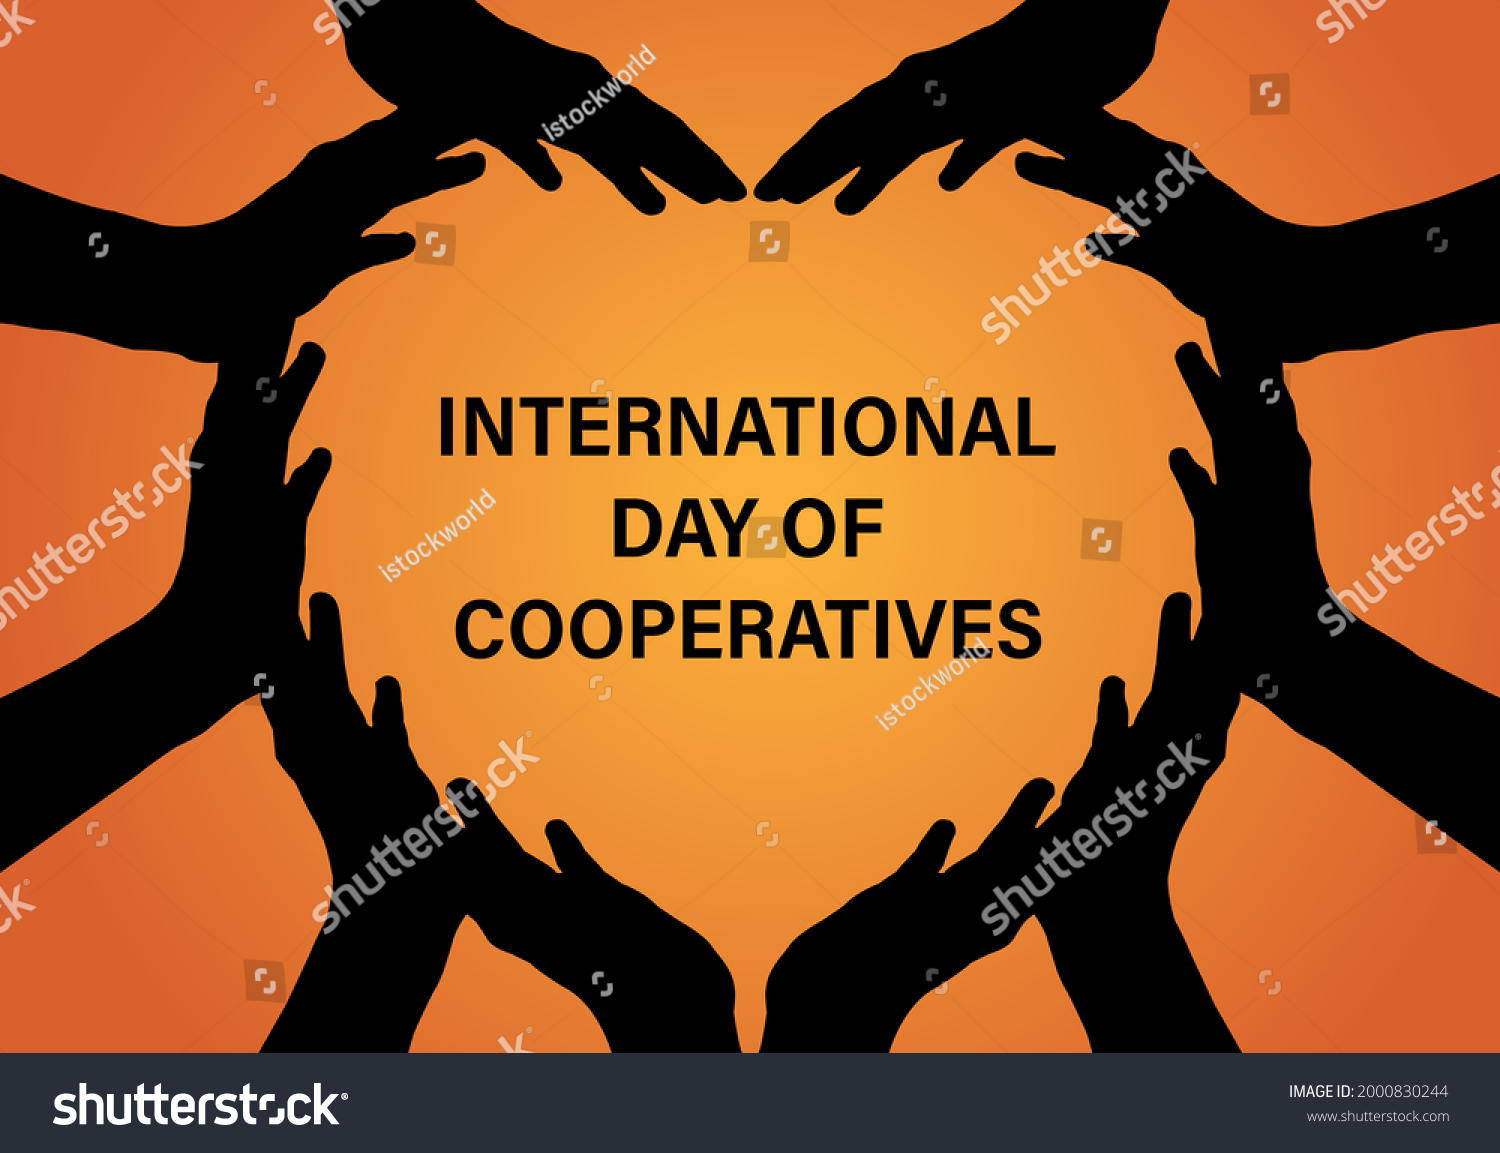 International Day Cooperatives Hands Shape Heart Stock Vector Royalty Free 2000830244 9239